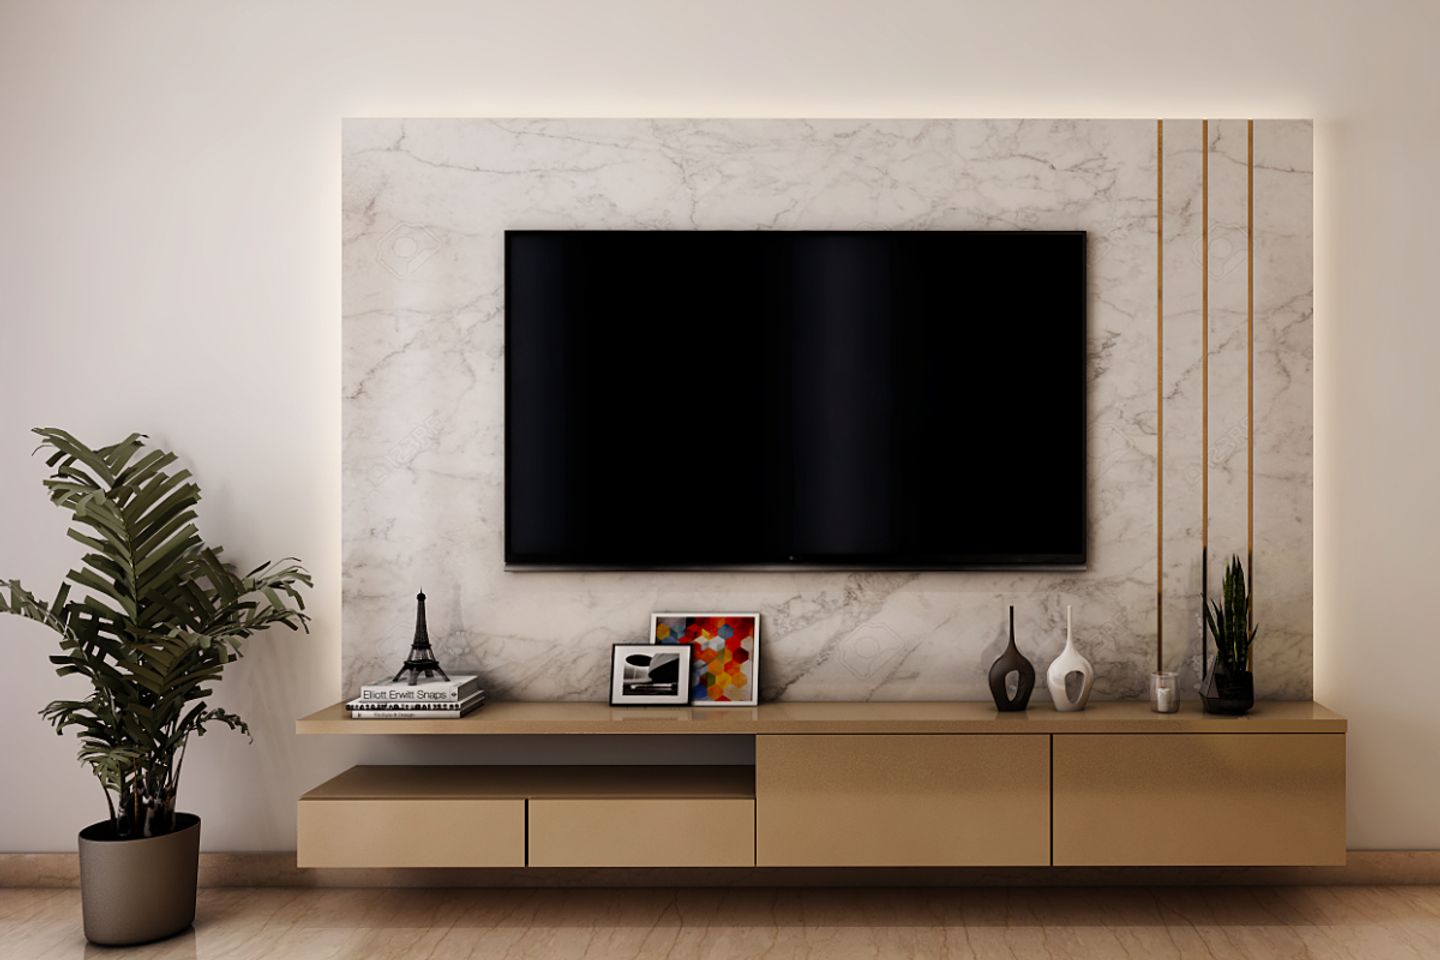 Beige TV Unit Design With Marble Dao And Gold Inlays - Livspace